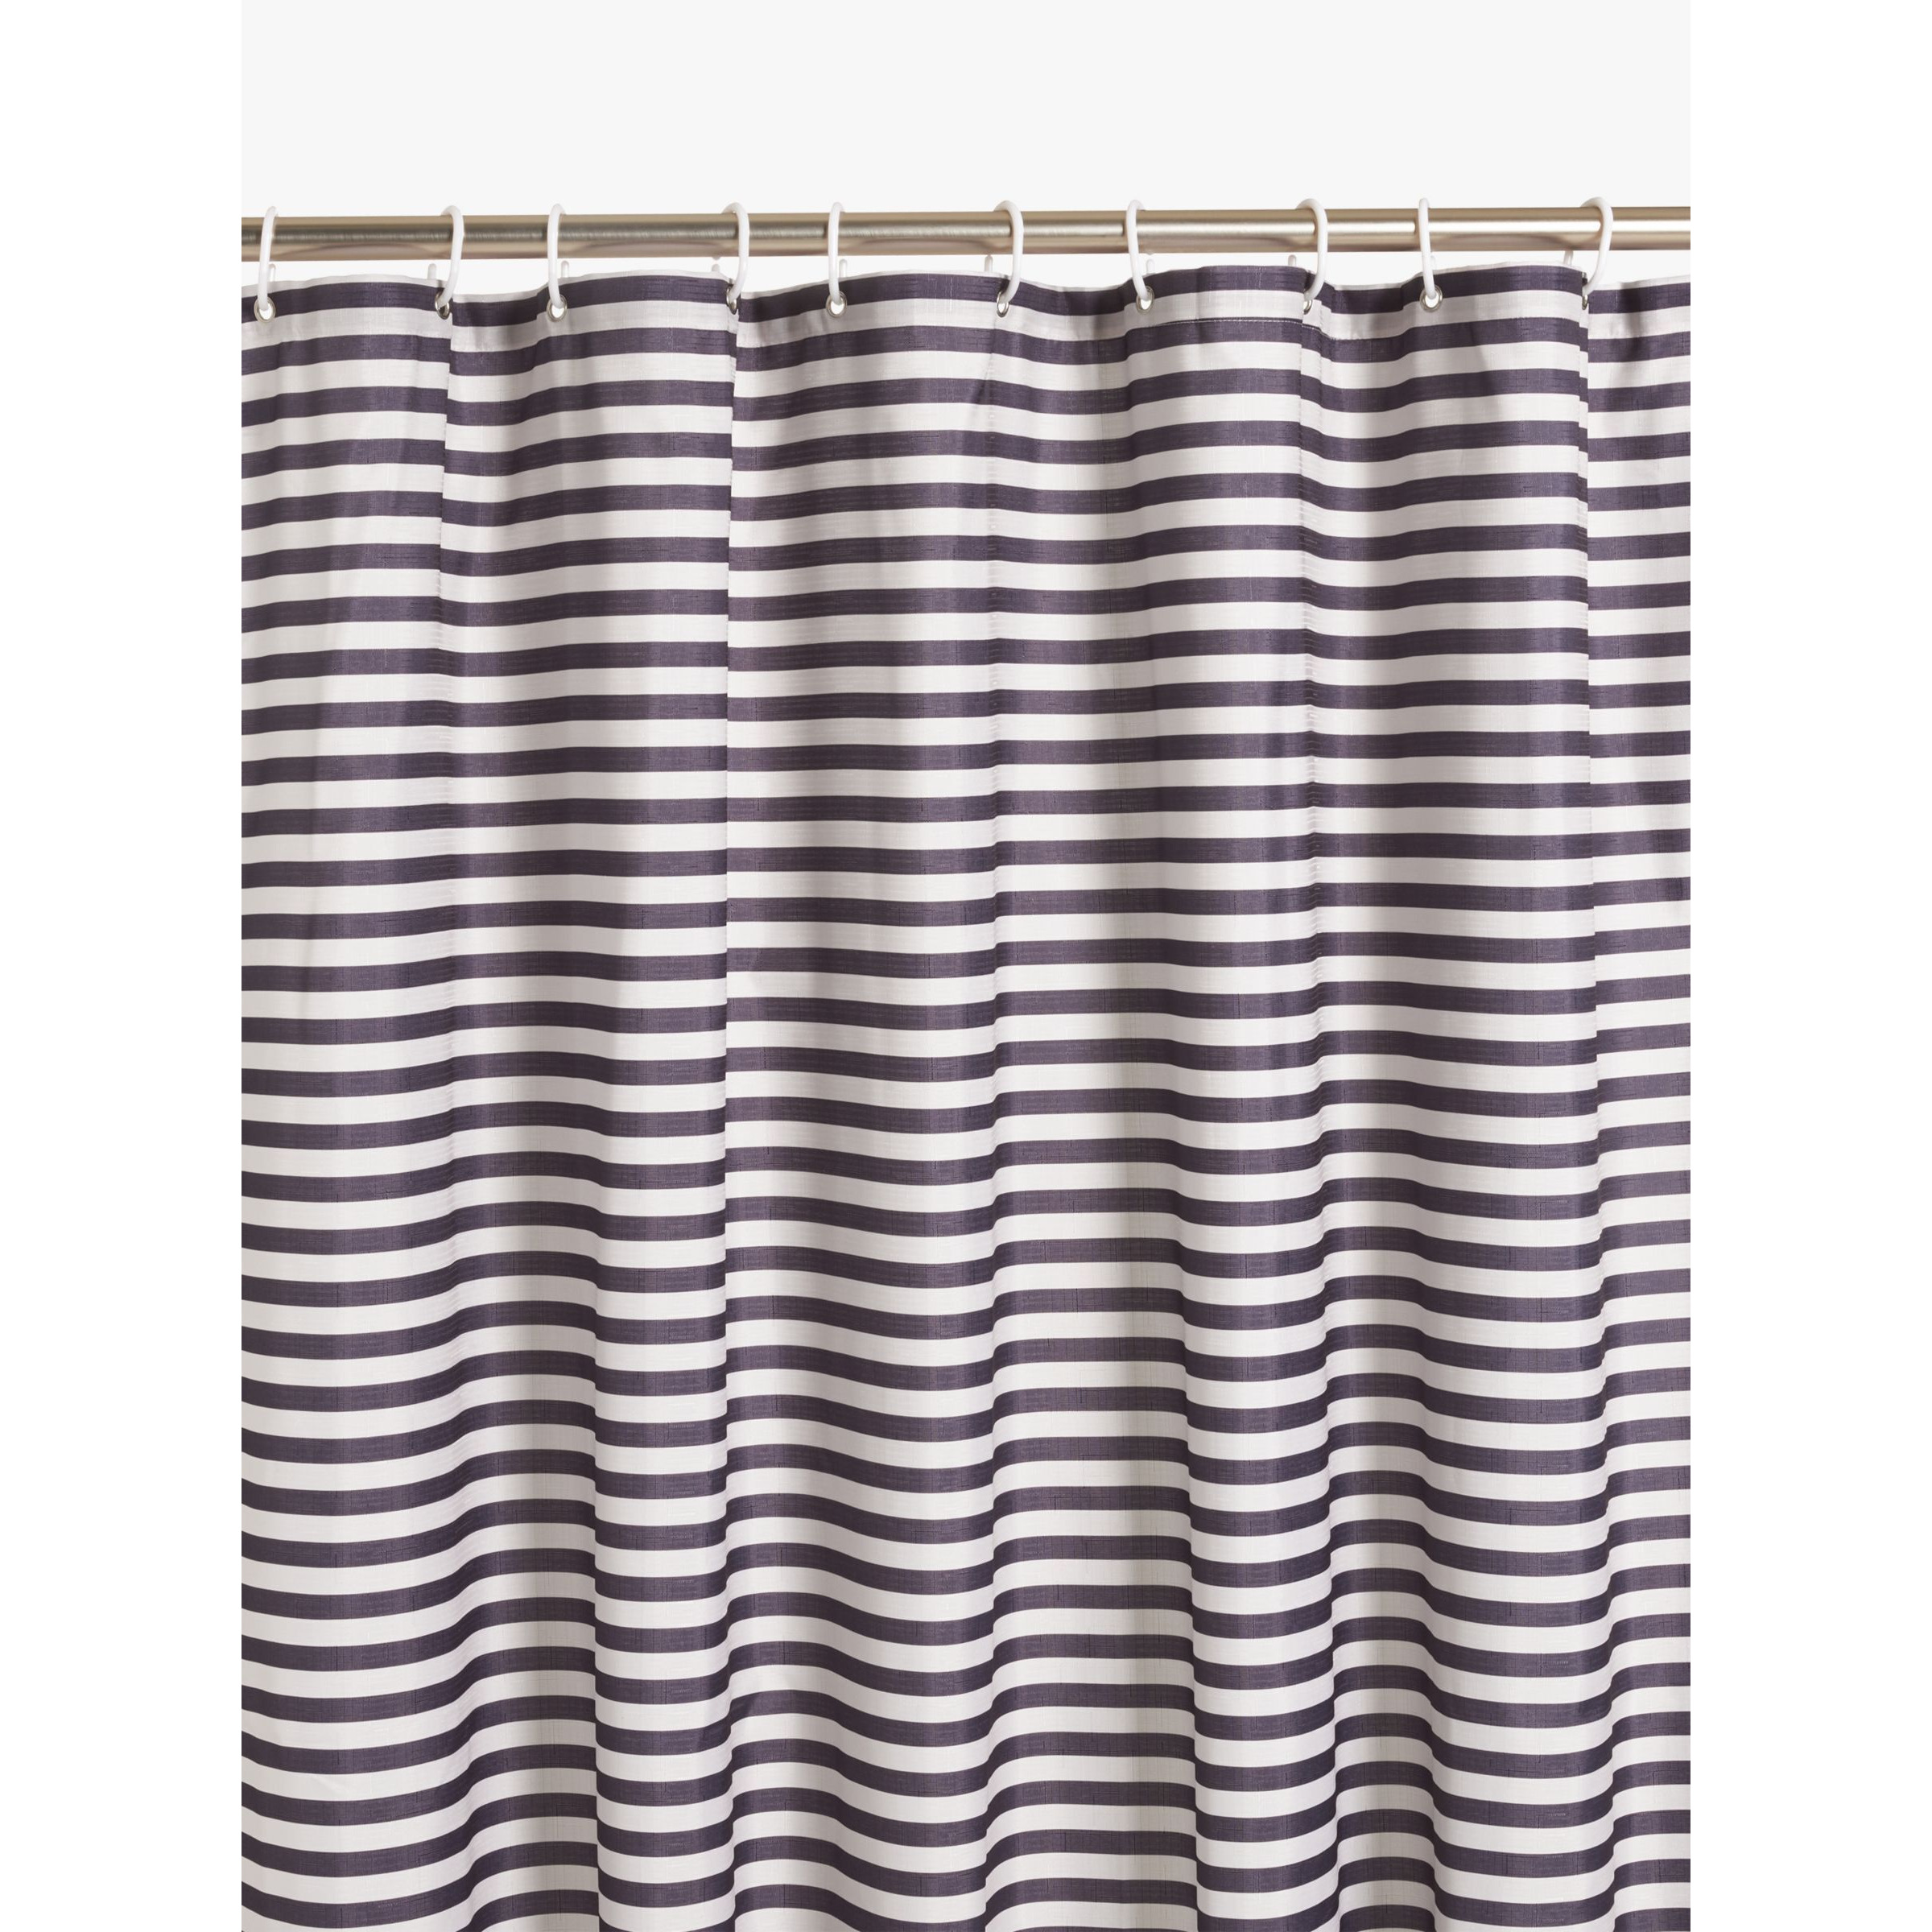 John Lewis Textured Horizontal Stripe Recycled Polyester Shower Curtain, Graphite - image 1